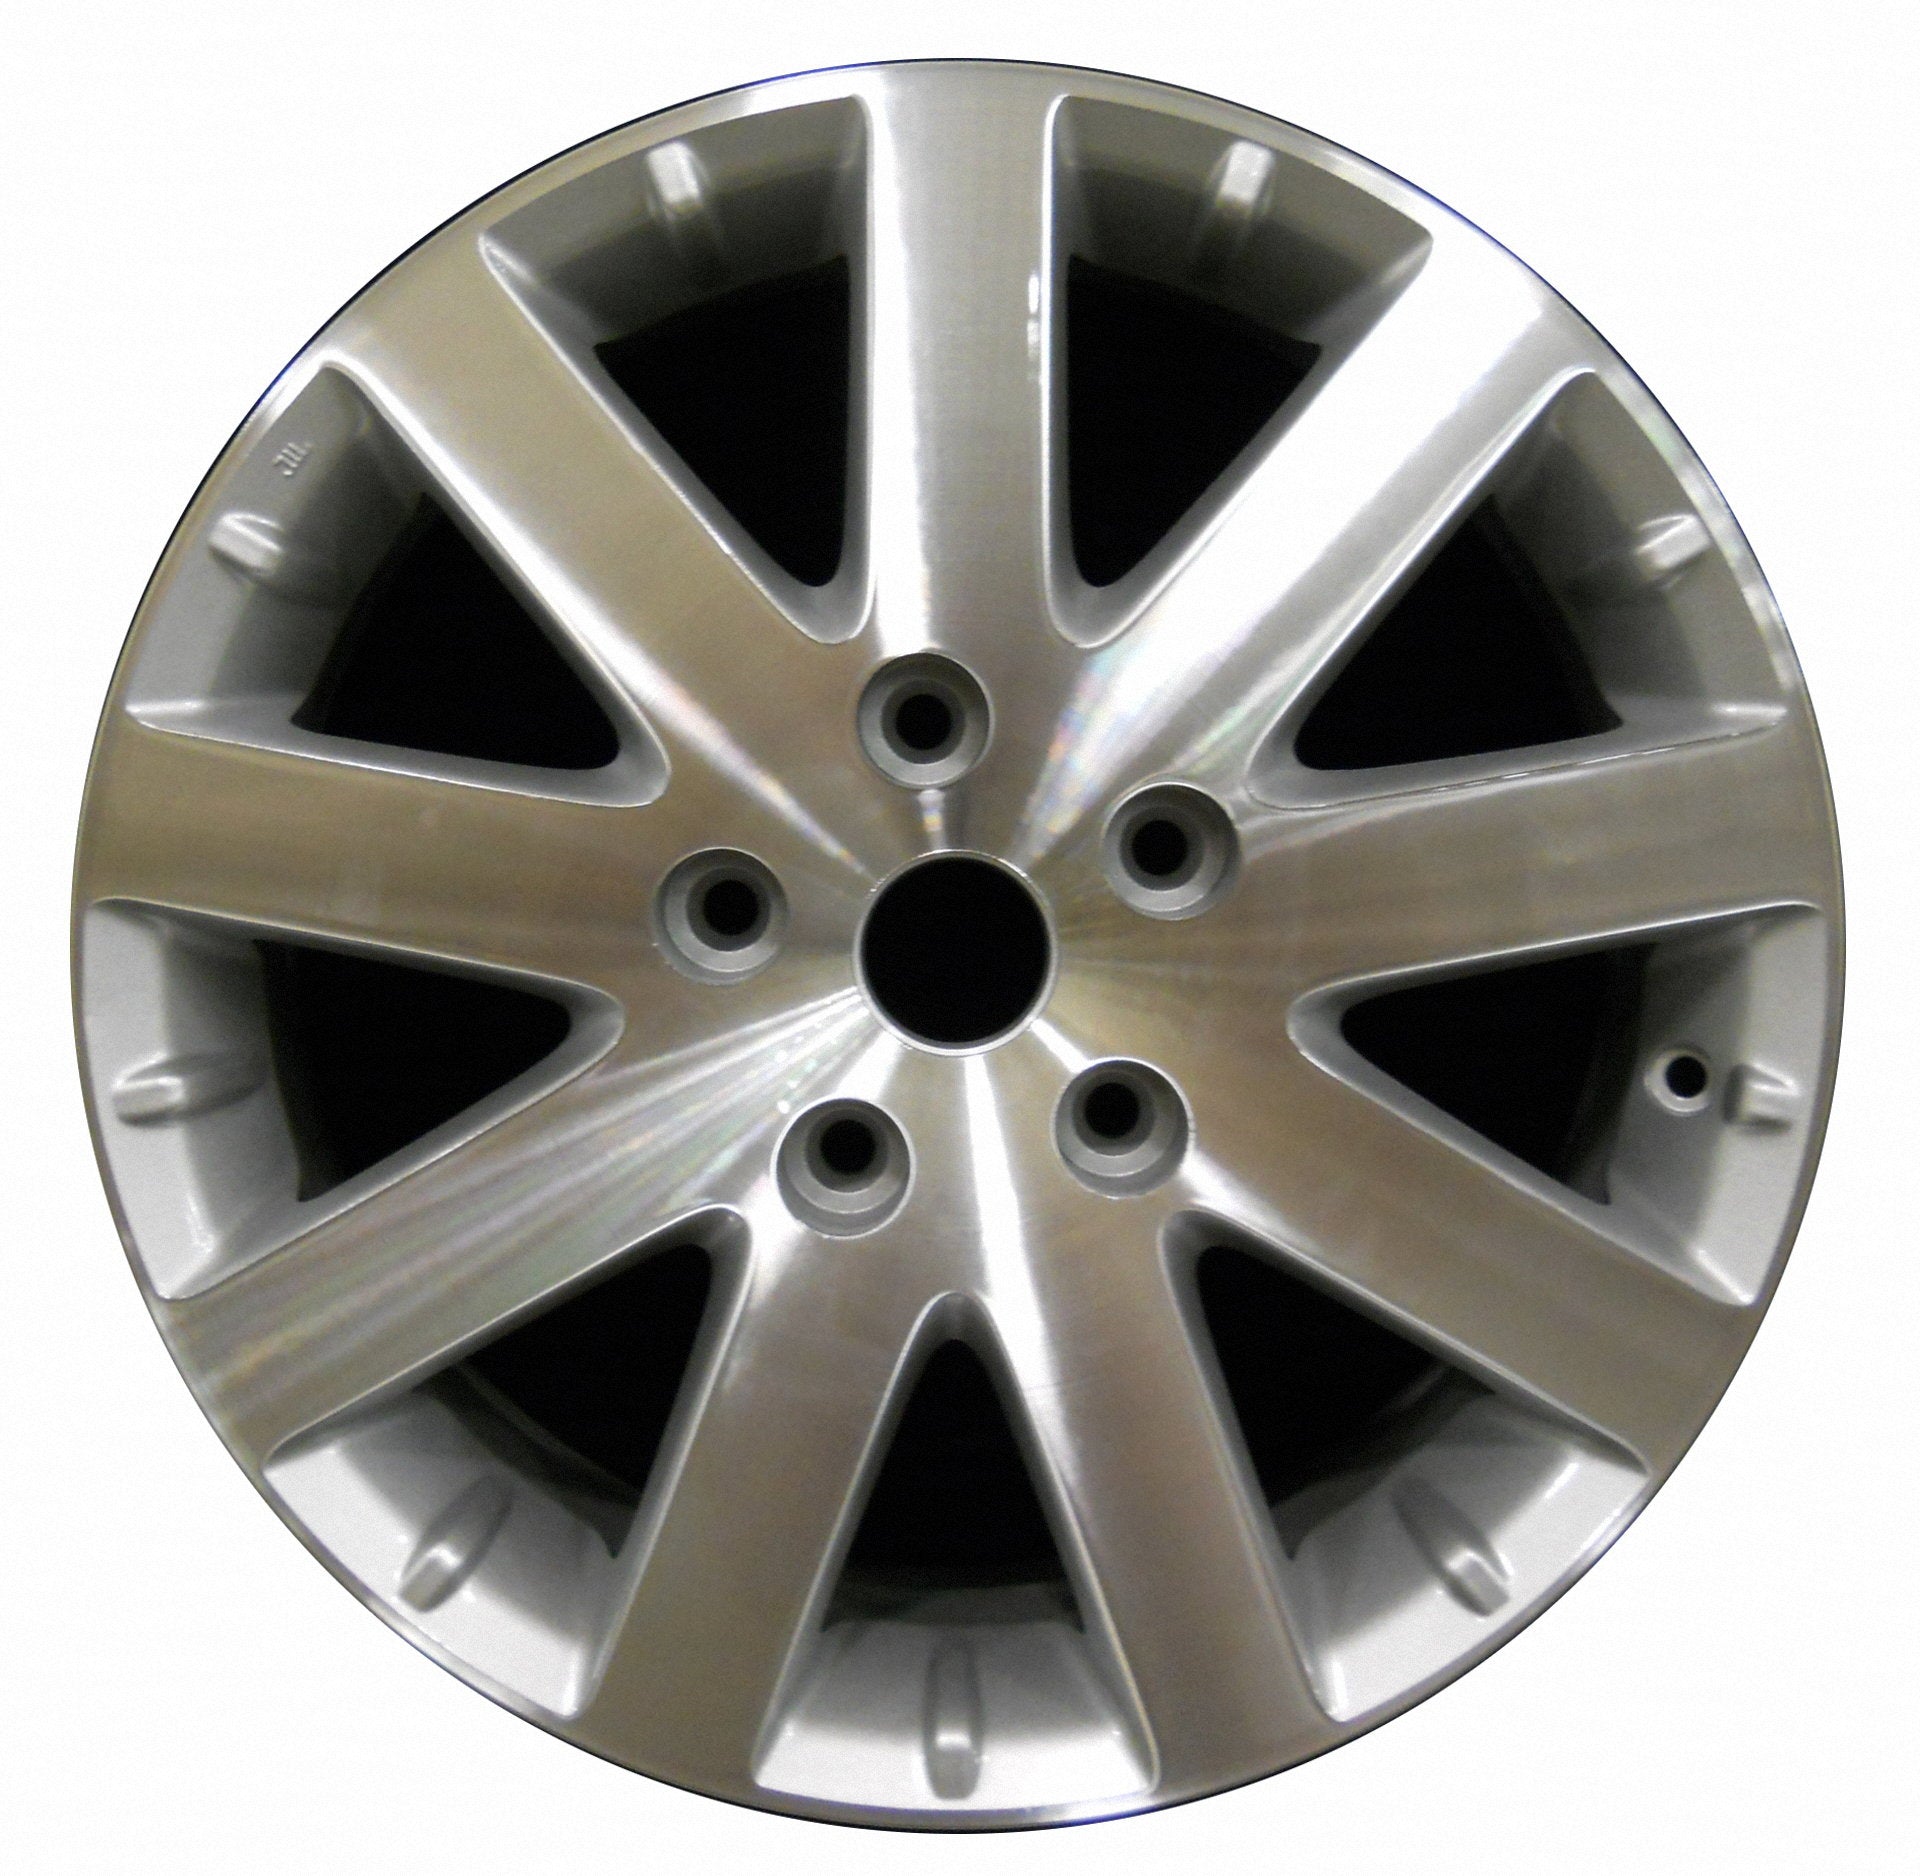 Chrysler Town & Country  2008, 2009, 2010 Factory OEM Car Wheel Size 17x6.5 Alloy WAO.2332.PS02.MA